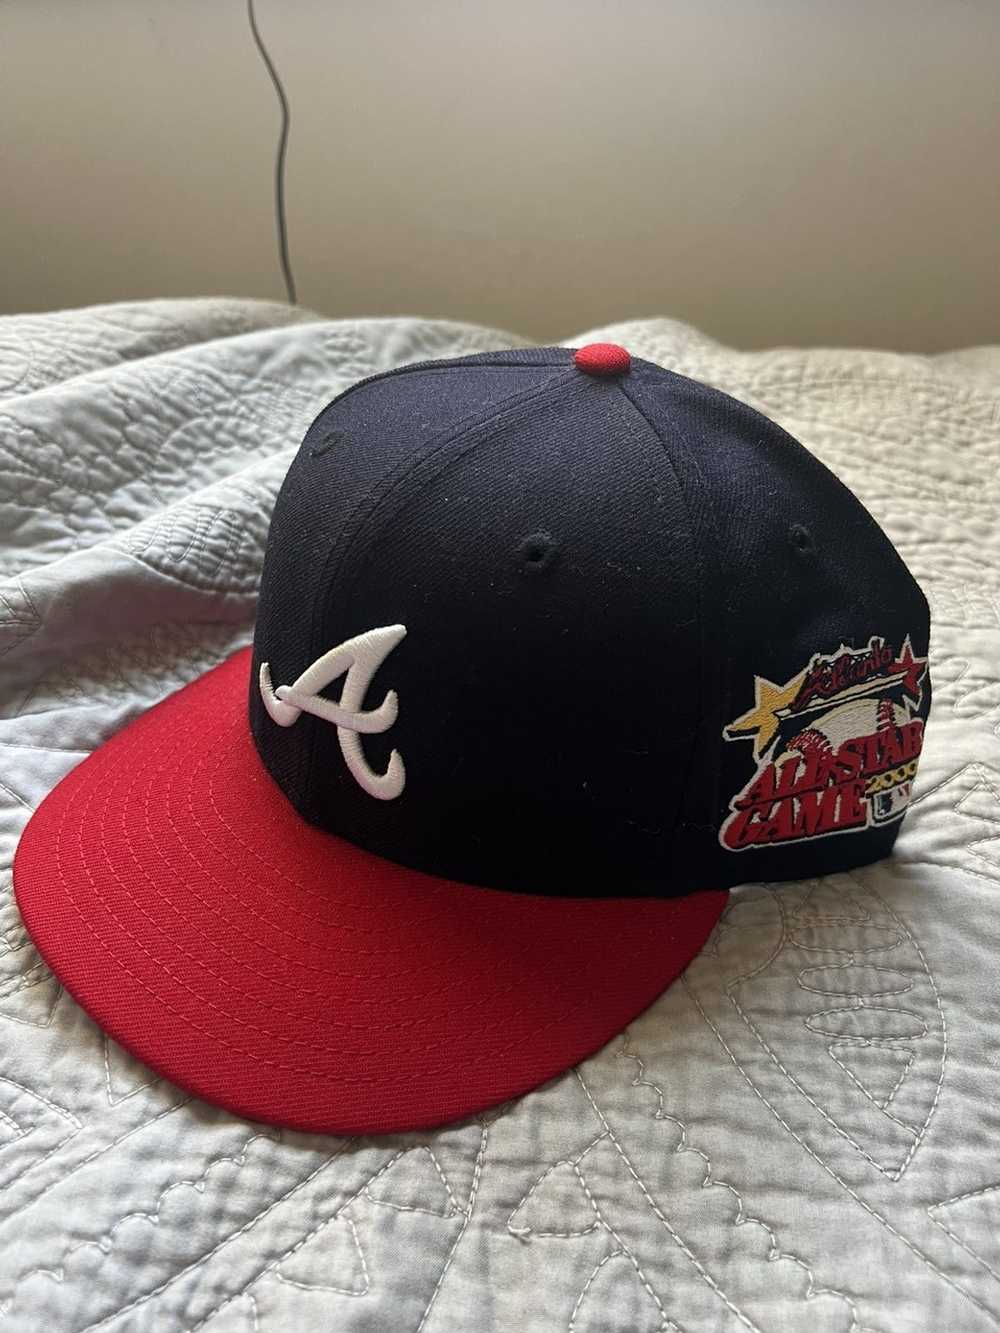 LIDS x NEW ERA 59FIFTY: ATLANTA BRAVES 2021 WORLD SERIES CHAMPIONS APPAREL  !!! FITTED FIEND EP. 173 